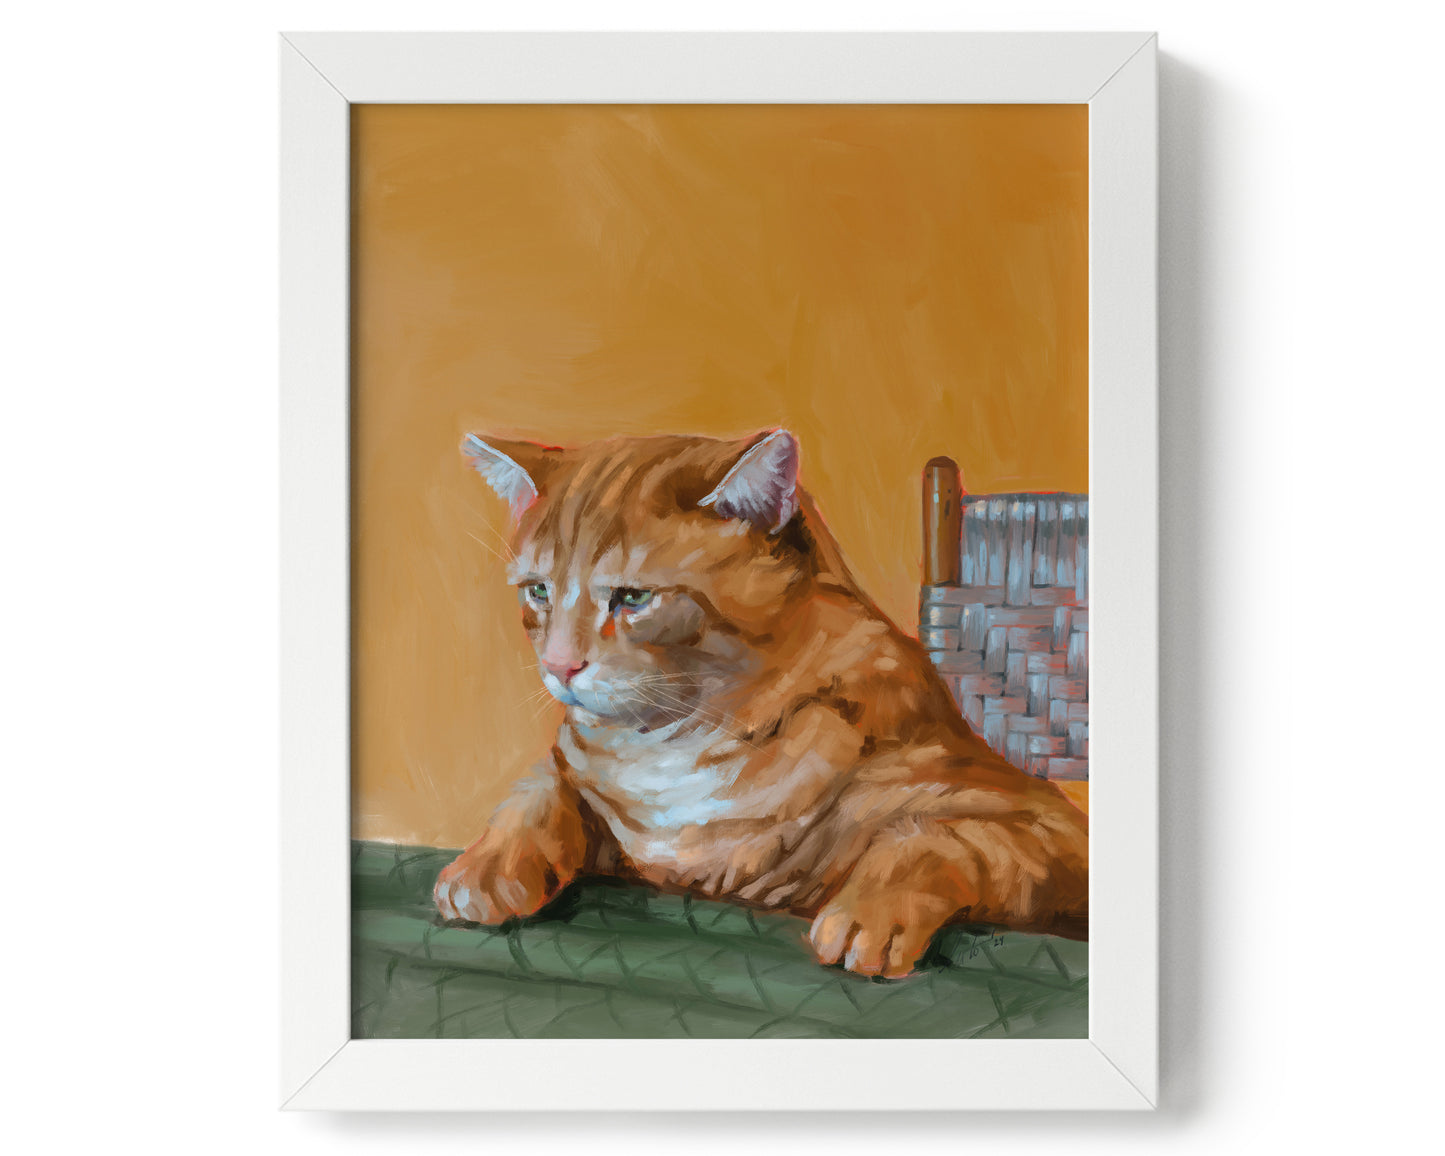 "Patapon" by Catherine Hébert - Orange Tabby Cat At The Dinner Table Art Print - 8"x10" size